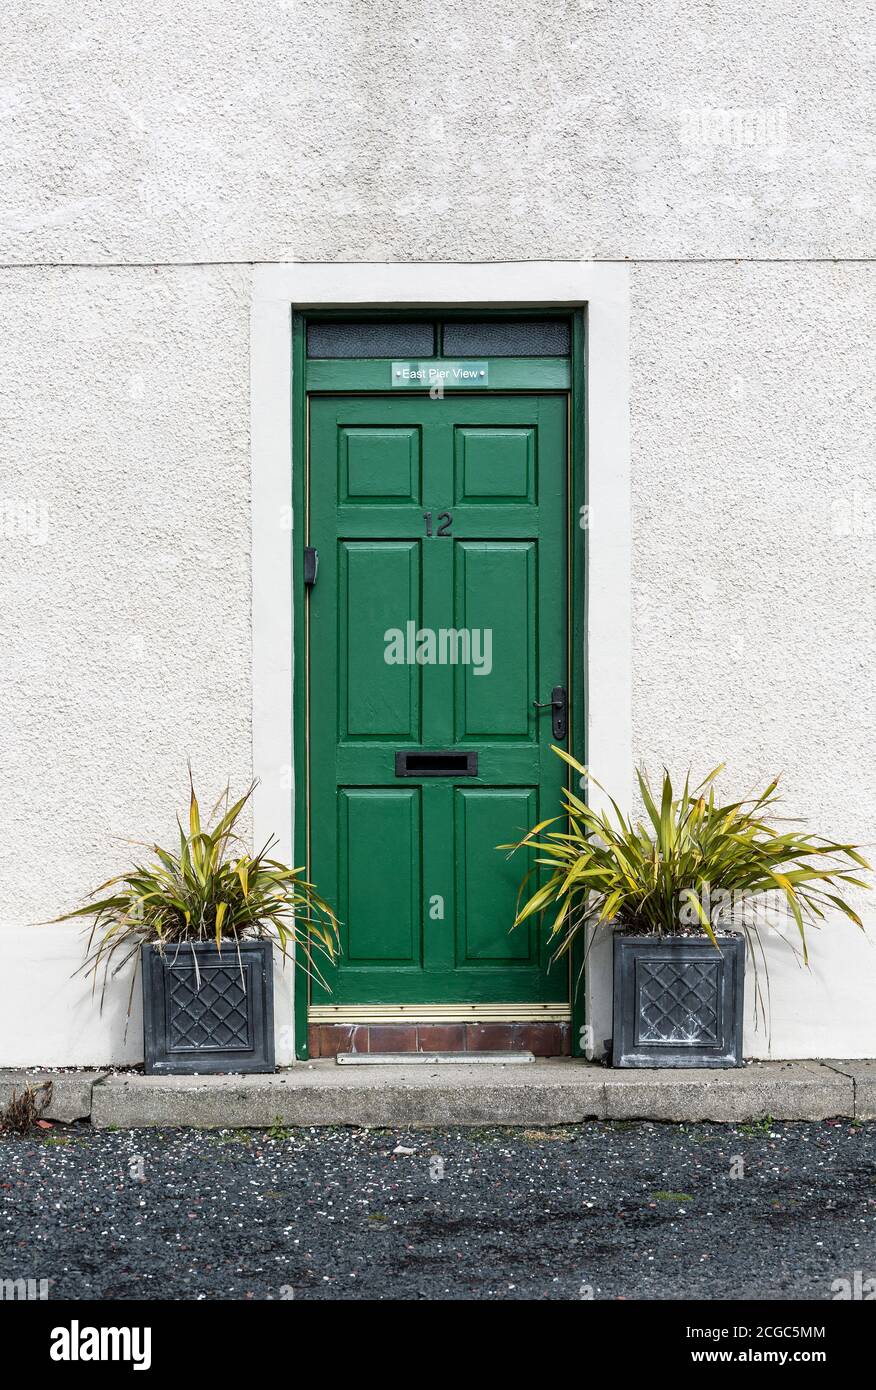 Green panelled front door with number 12 and plant pots on either side. Stock Photo